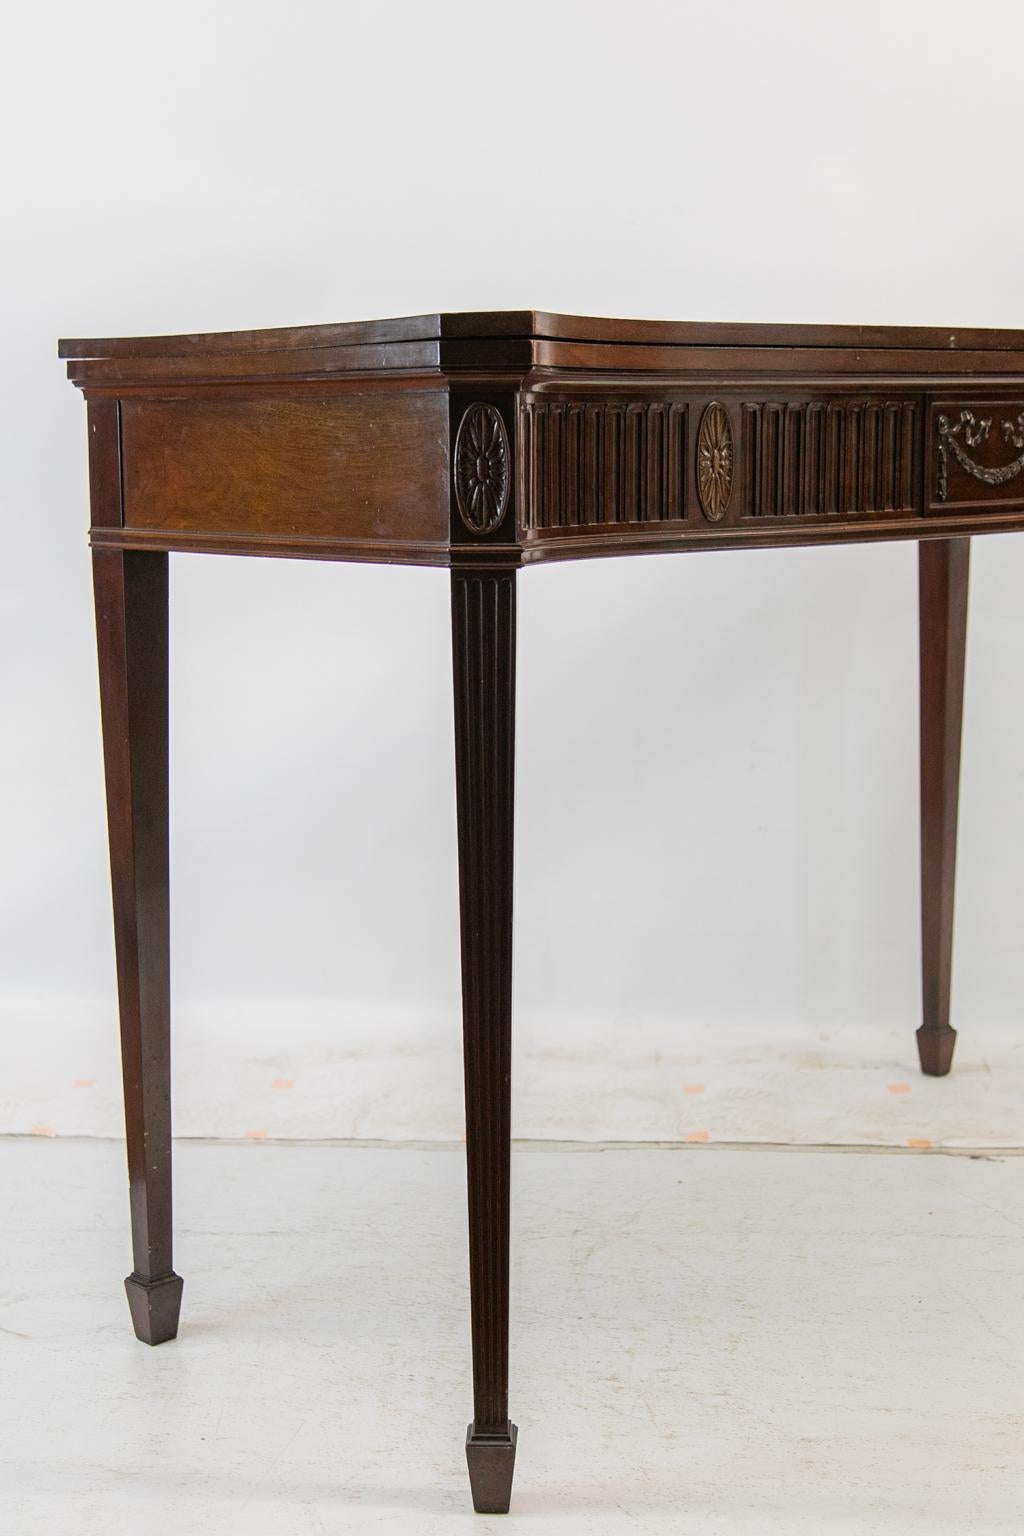 English Mahogany Serpentine Hepplewhite Console Table or Server For Sale 2